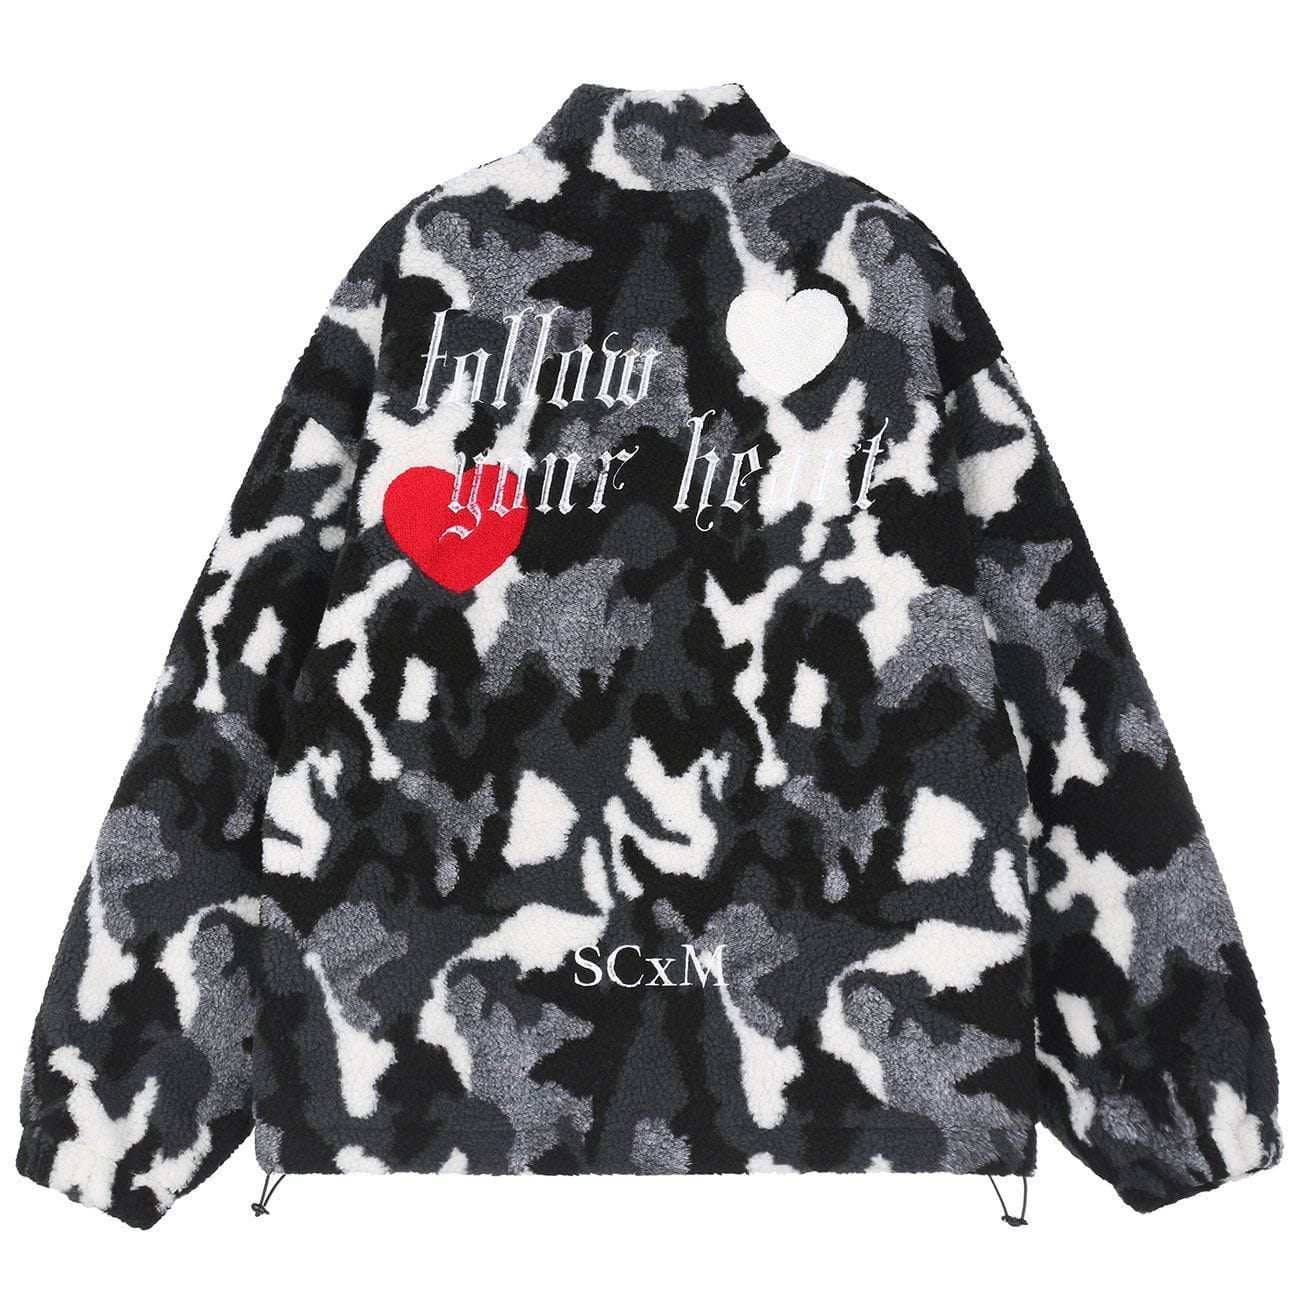 LUXENFY™ - Vintage Camouflage Love Embroidery Sherpa Coat luxenfy.com